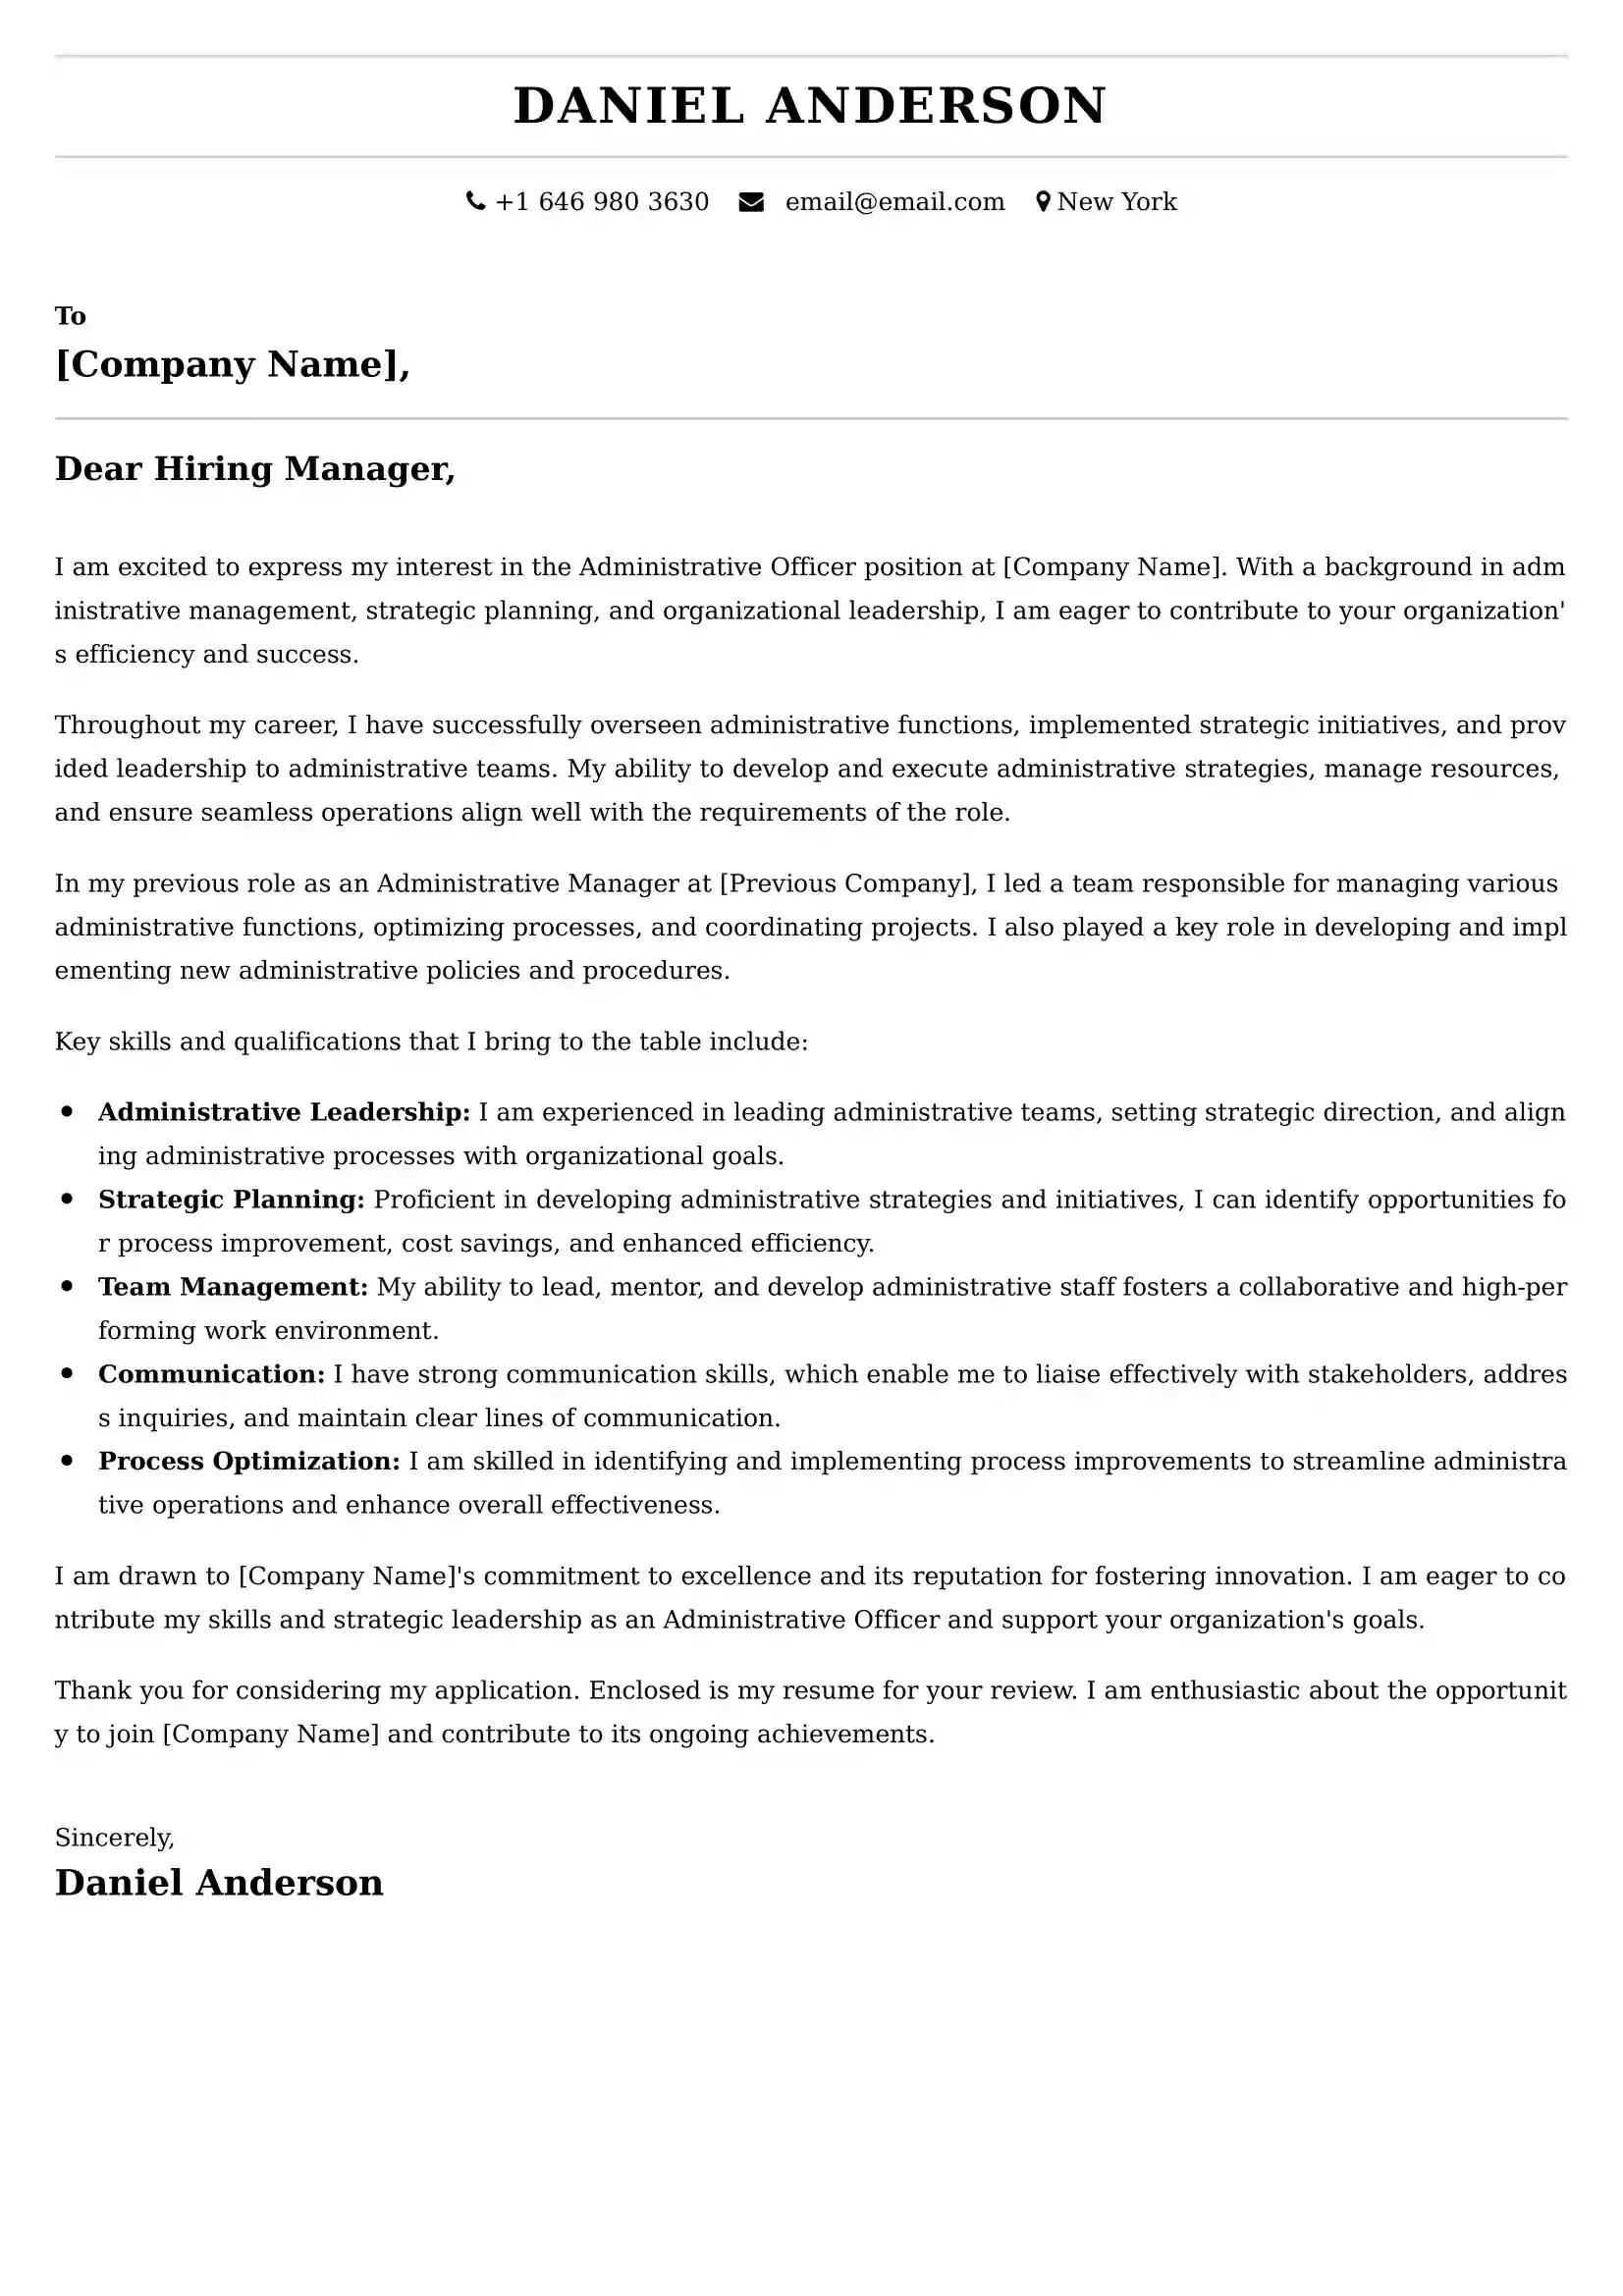 Administrative Officer Cover Letter Examples -Latest Brazilian Templates